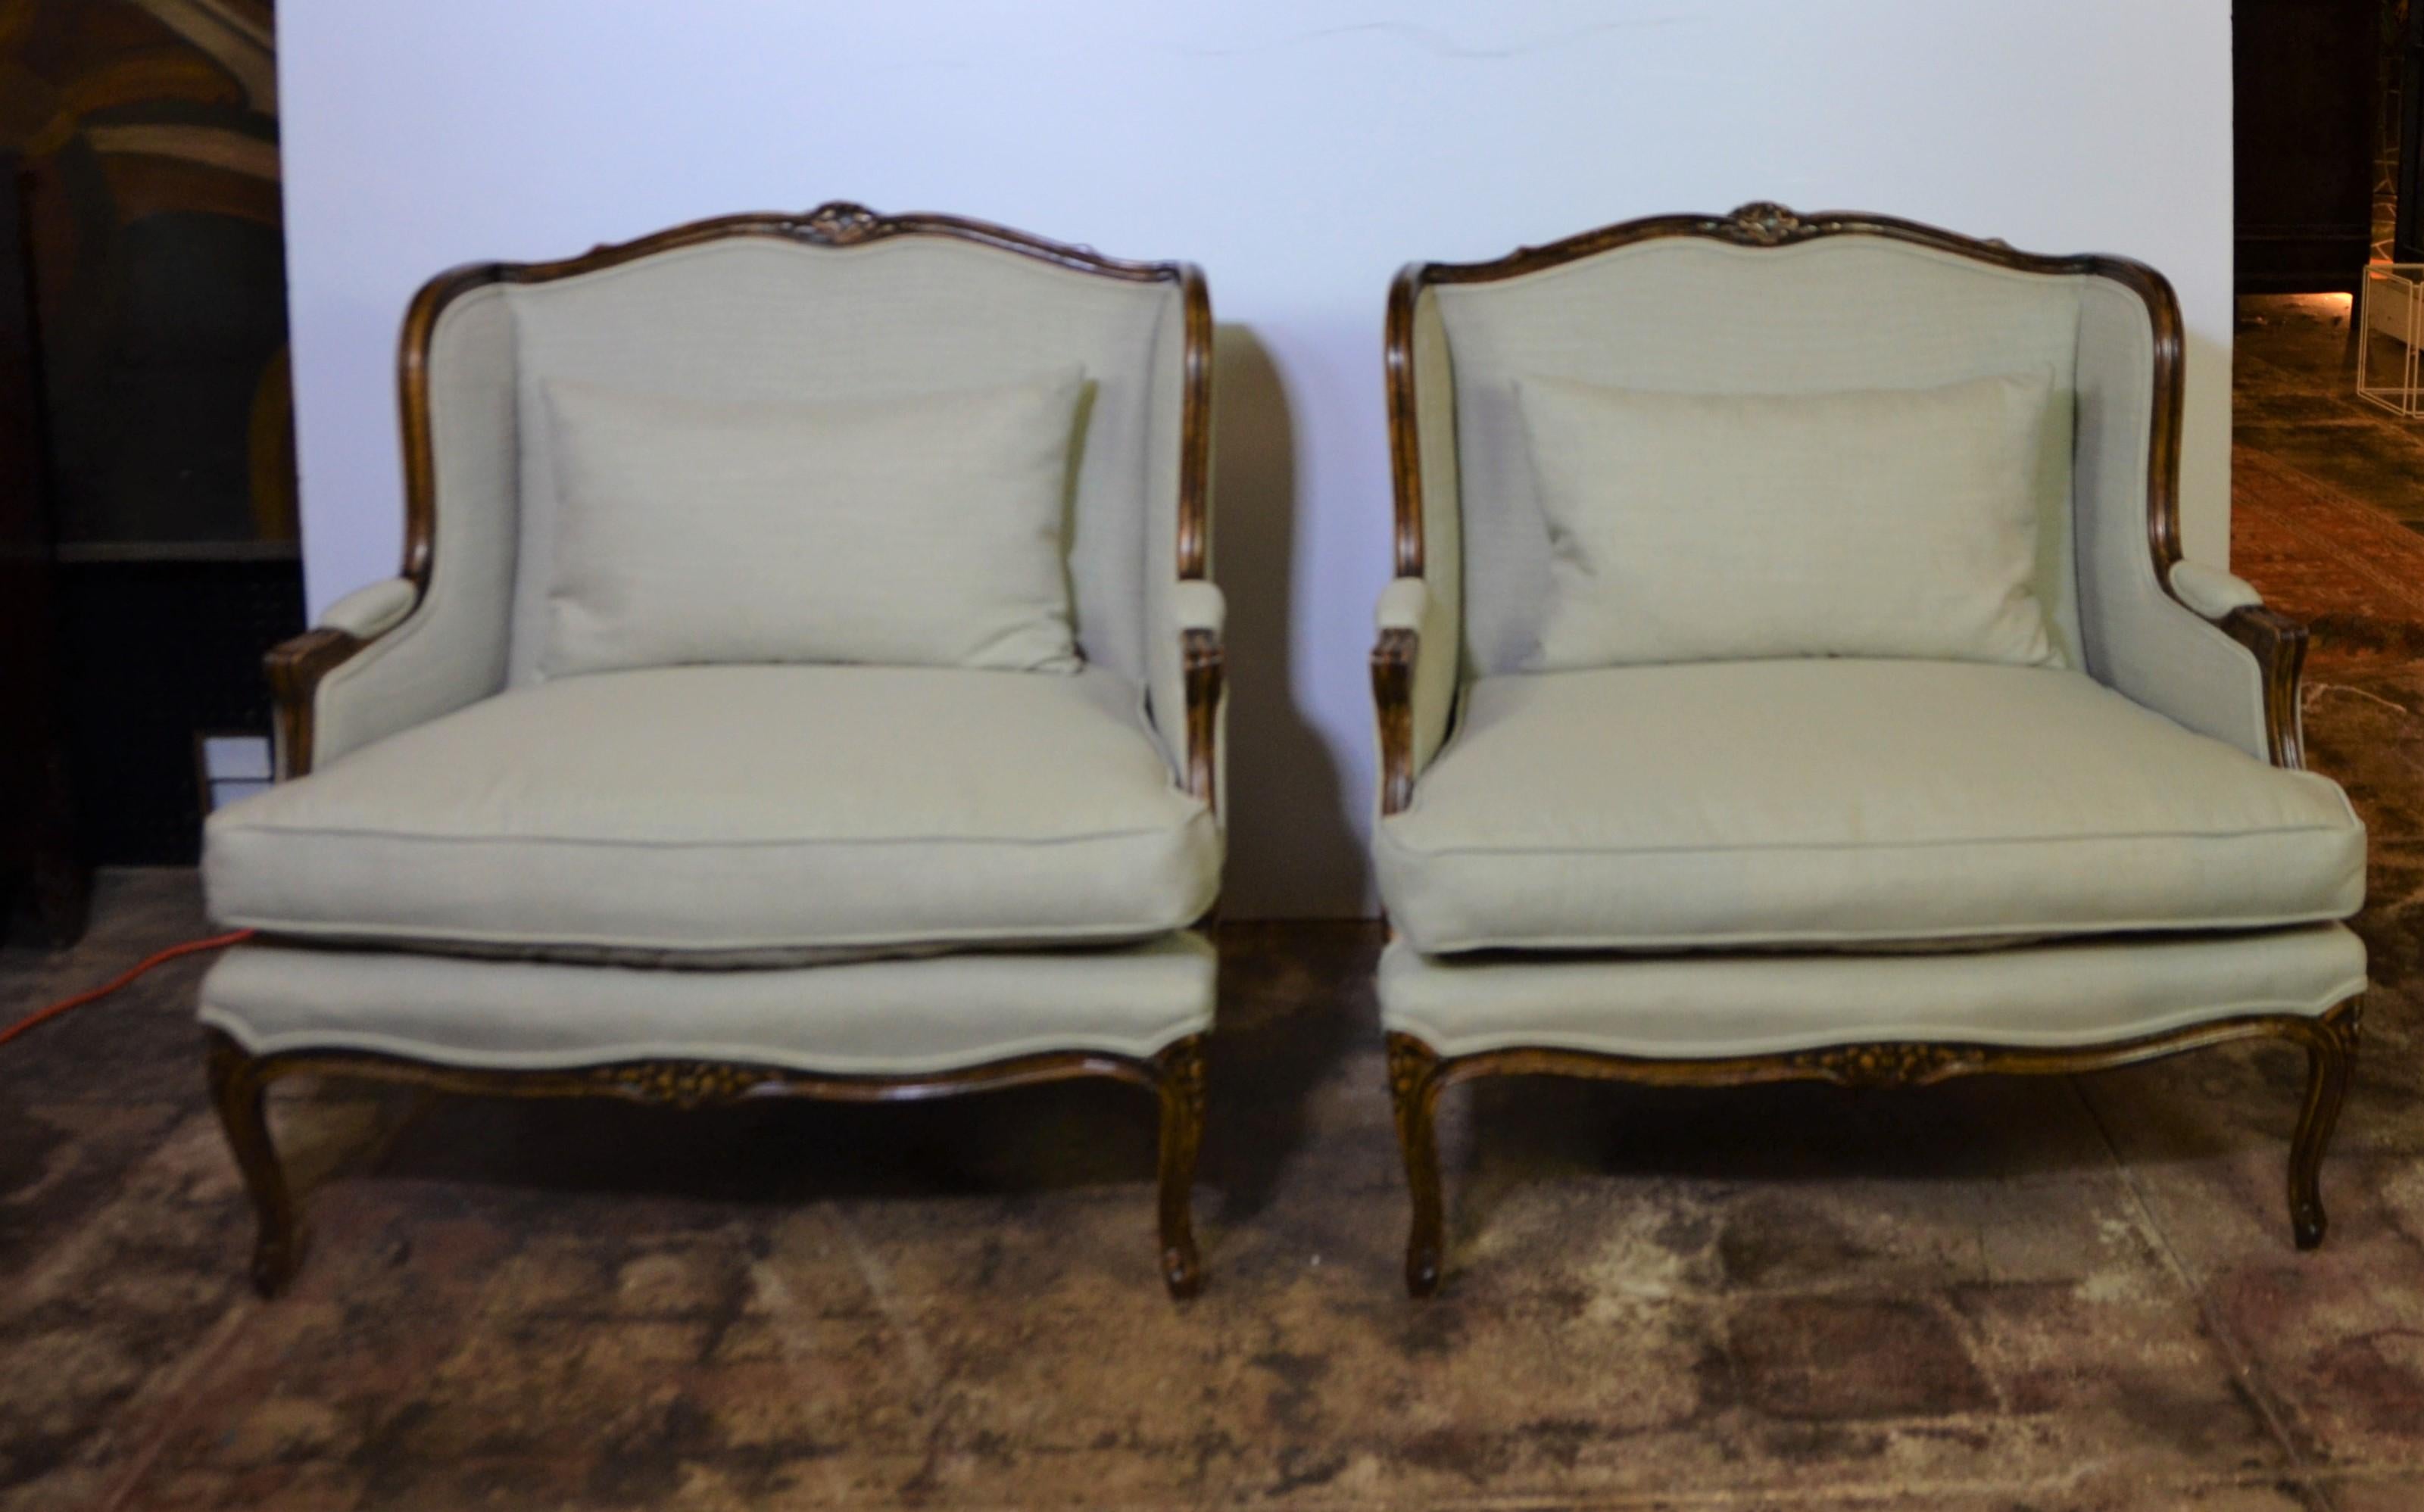 Pair of Louis XV style Classic style Bergere chairs. The chairs are newly upholstered in light gray color fabric.